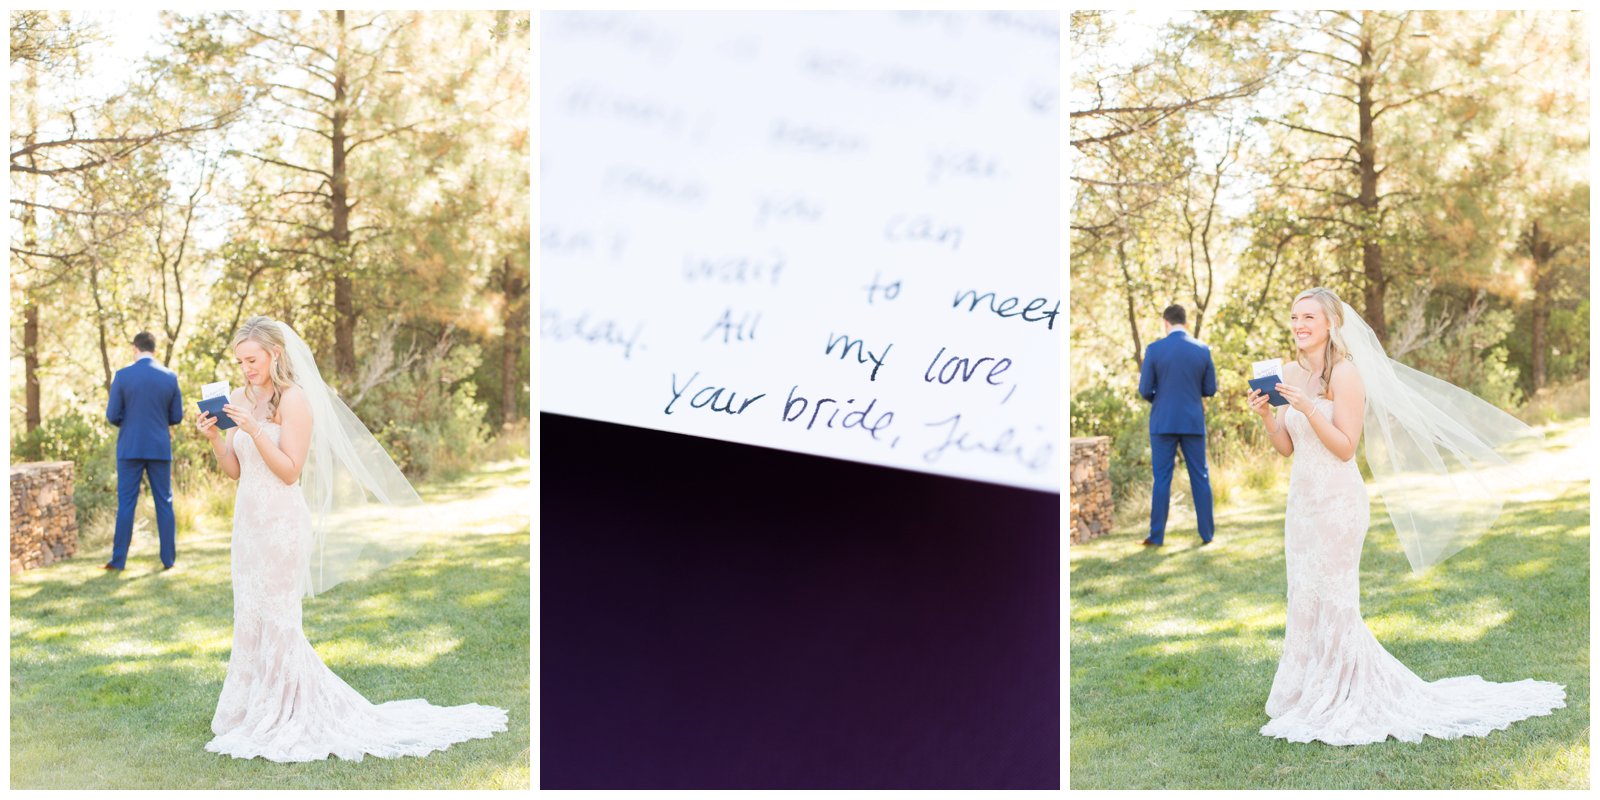 Reading notes to eachother, bride and groom 